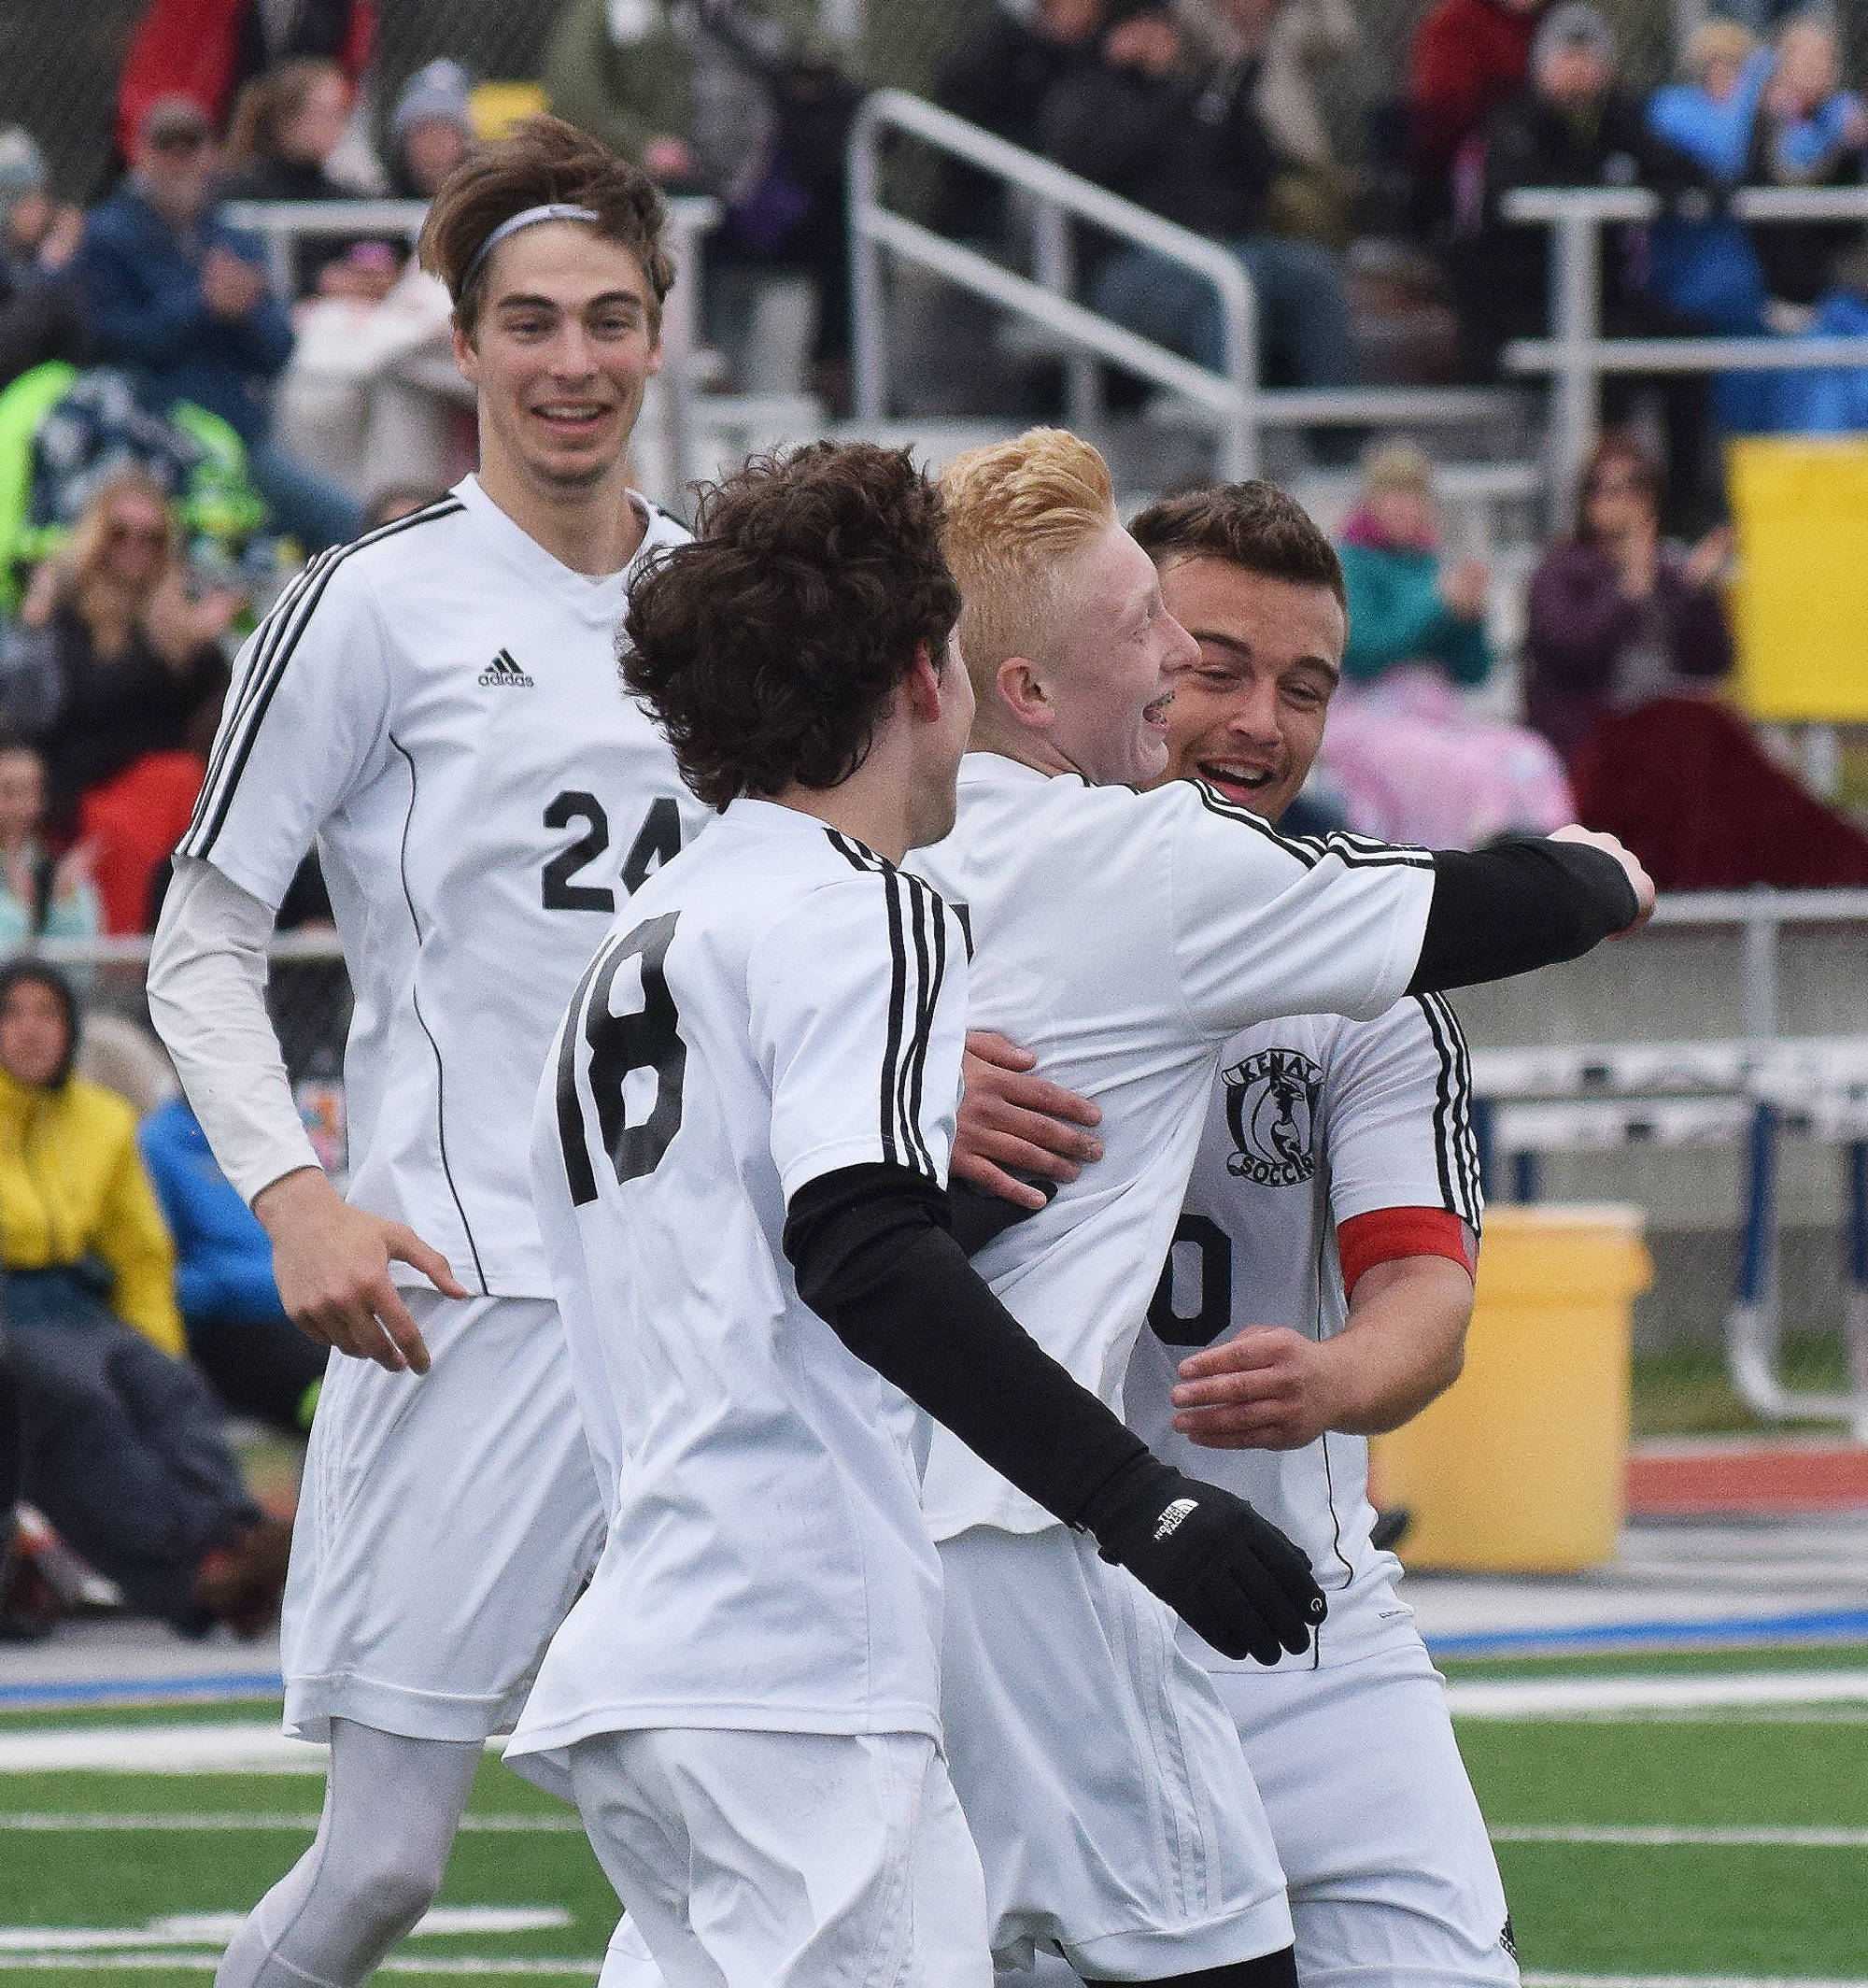 Kenai’s Braydon Goodman, Damien Redder and Luke Beiser celebrate with teammate Leif Lofquist (center) after Lofquist scored Saturday in the Peninsula Conference boys soccer championship against Homer at Soldotna High School. (Photo by Joey Klecka/Peninsula Clarion)